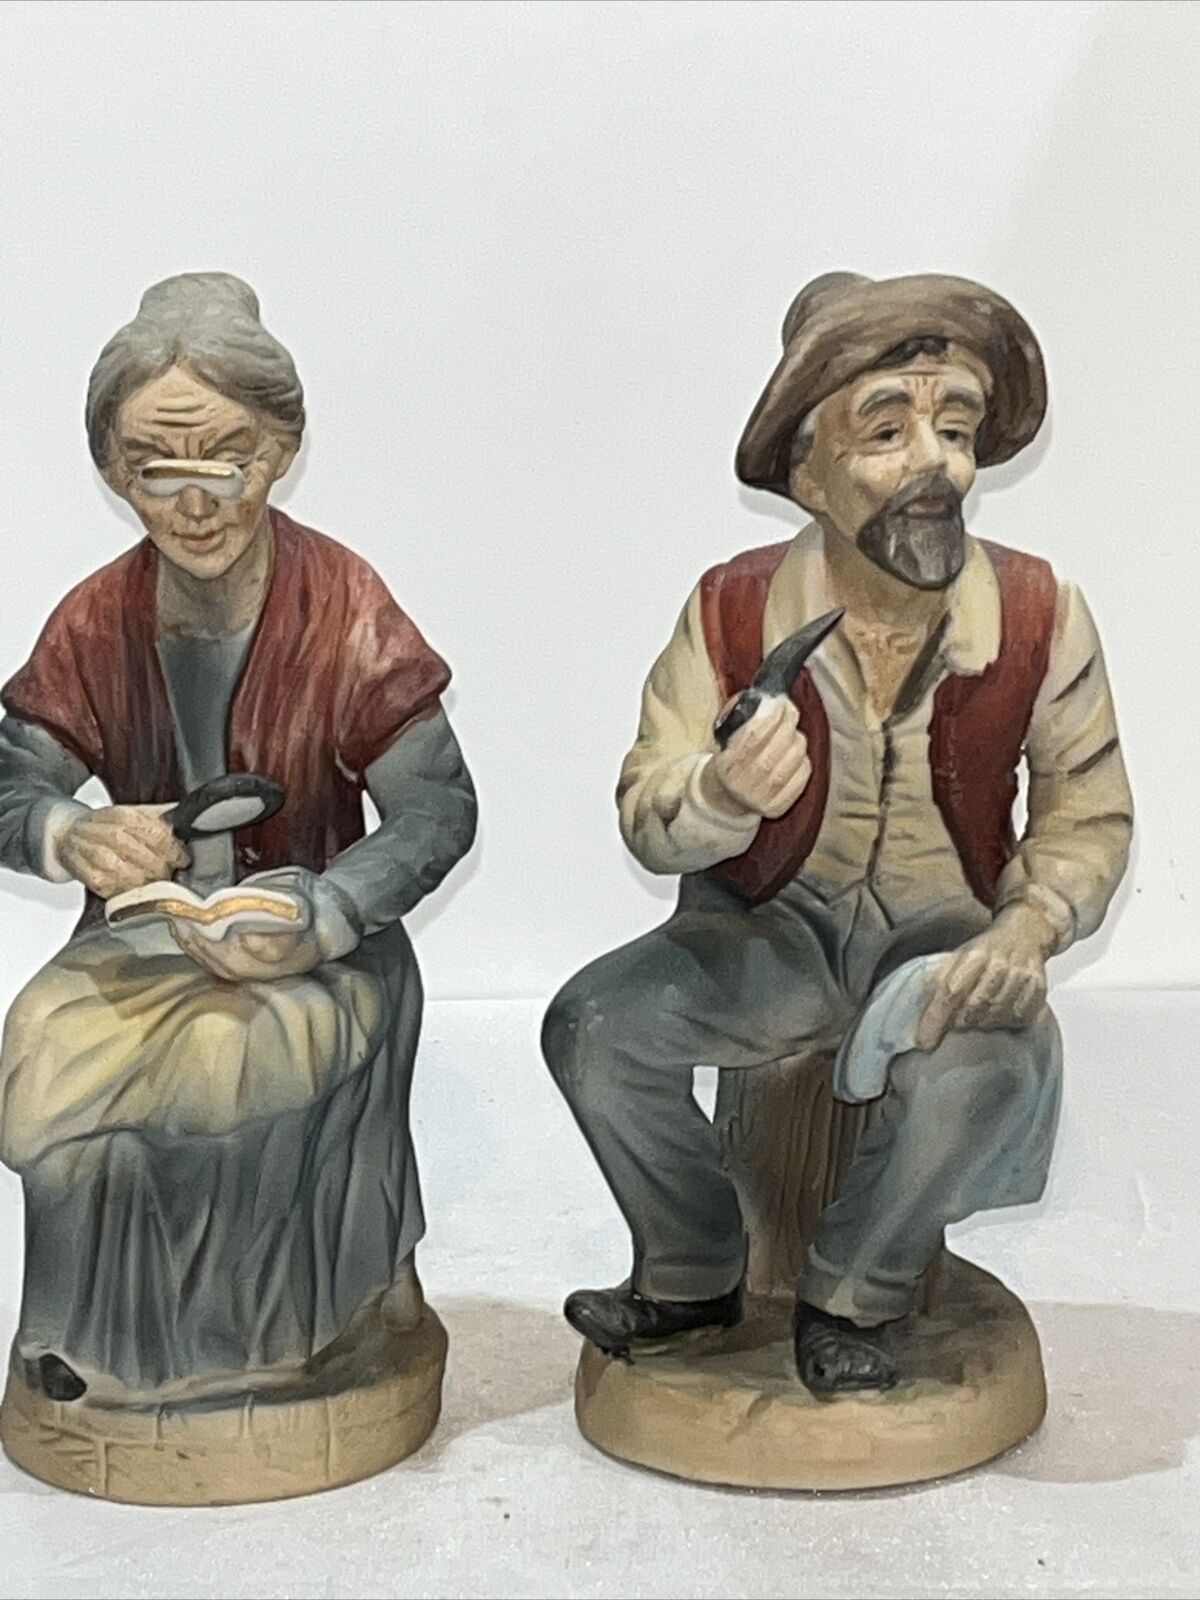 Vintage Napcoware Old Man With Pipe & Old Woman Reading Book Ceramic Figurines7”